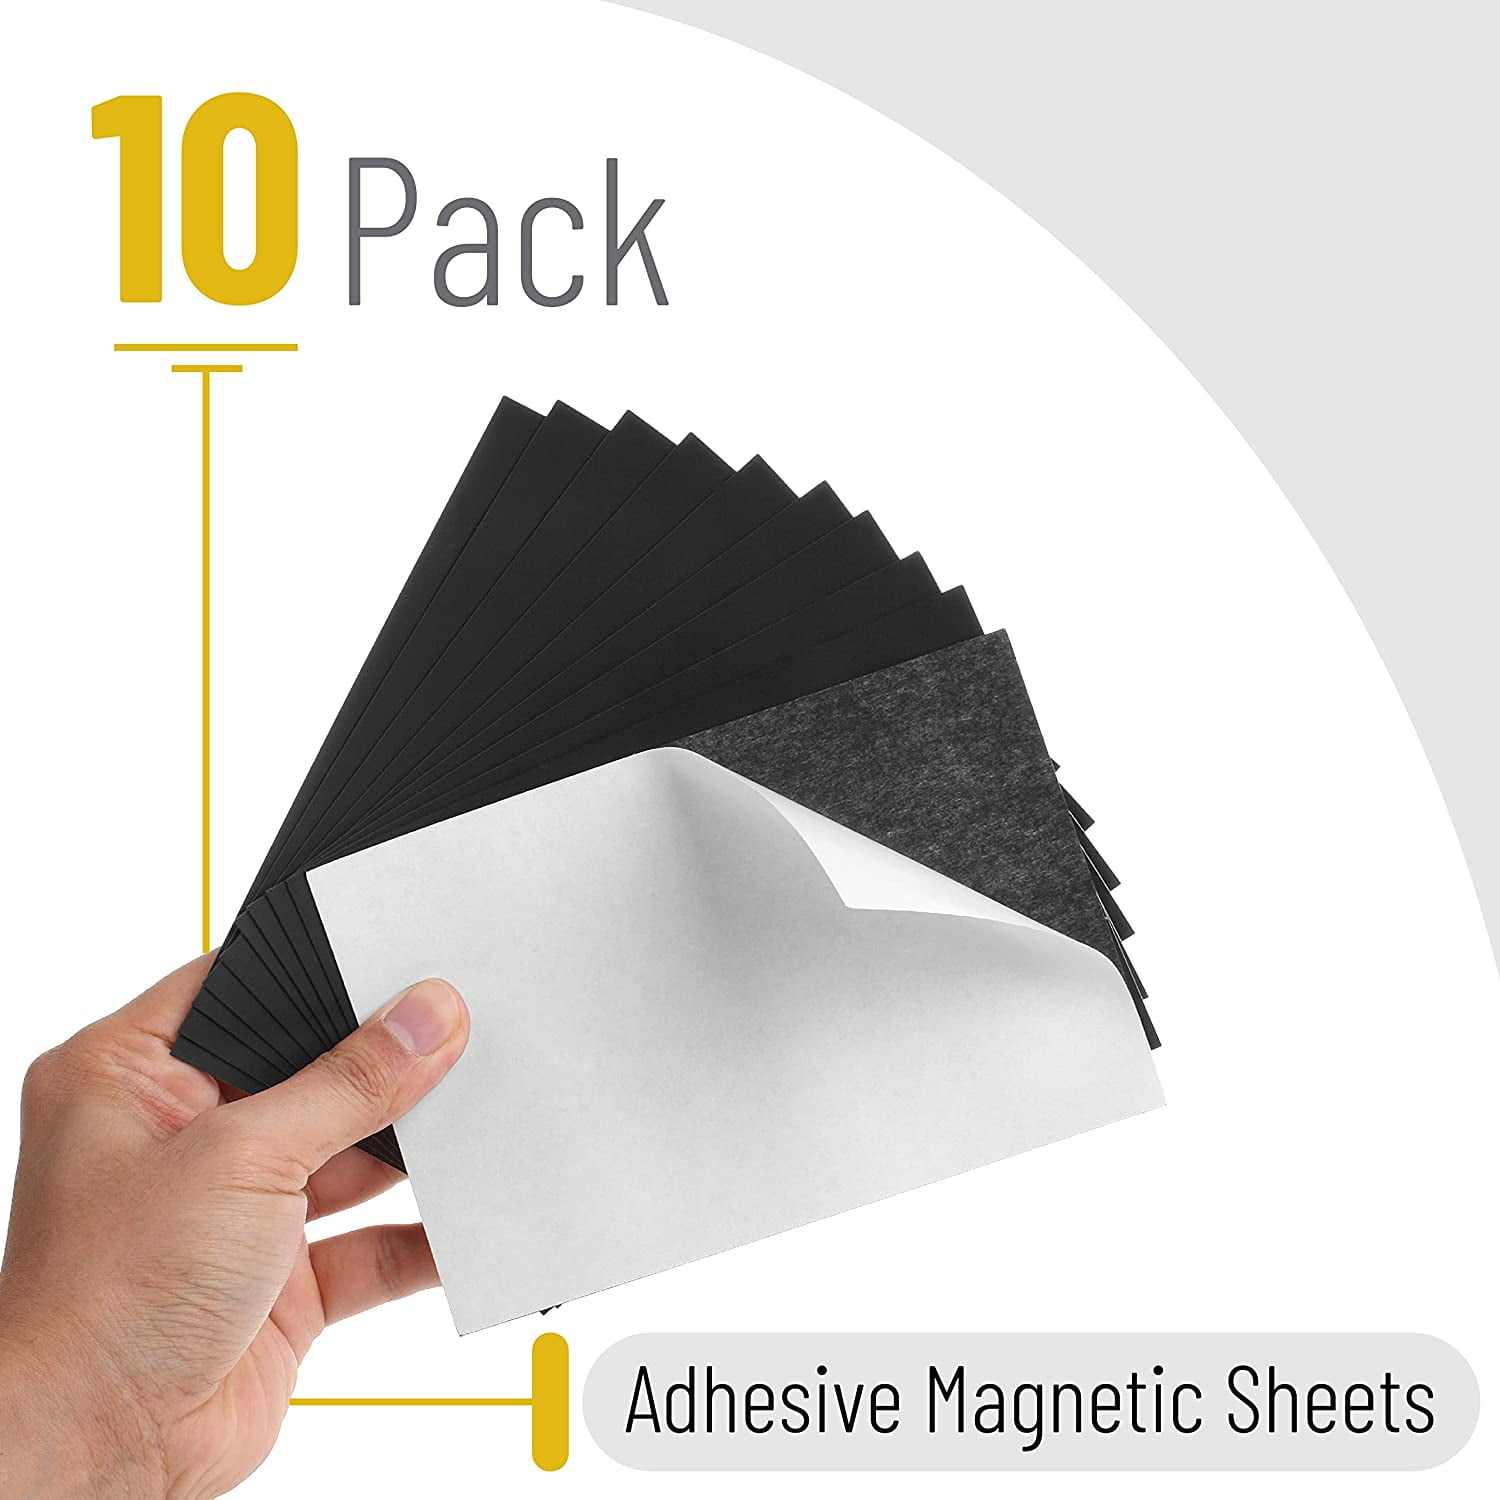 High Temp Magnet Sheet - GraviFlex® 200 - Schallenkammer strong hold  Magnetic Base with adhesive for Flex Plates